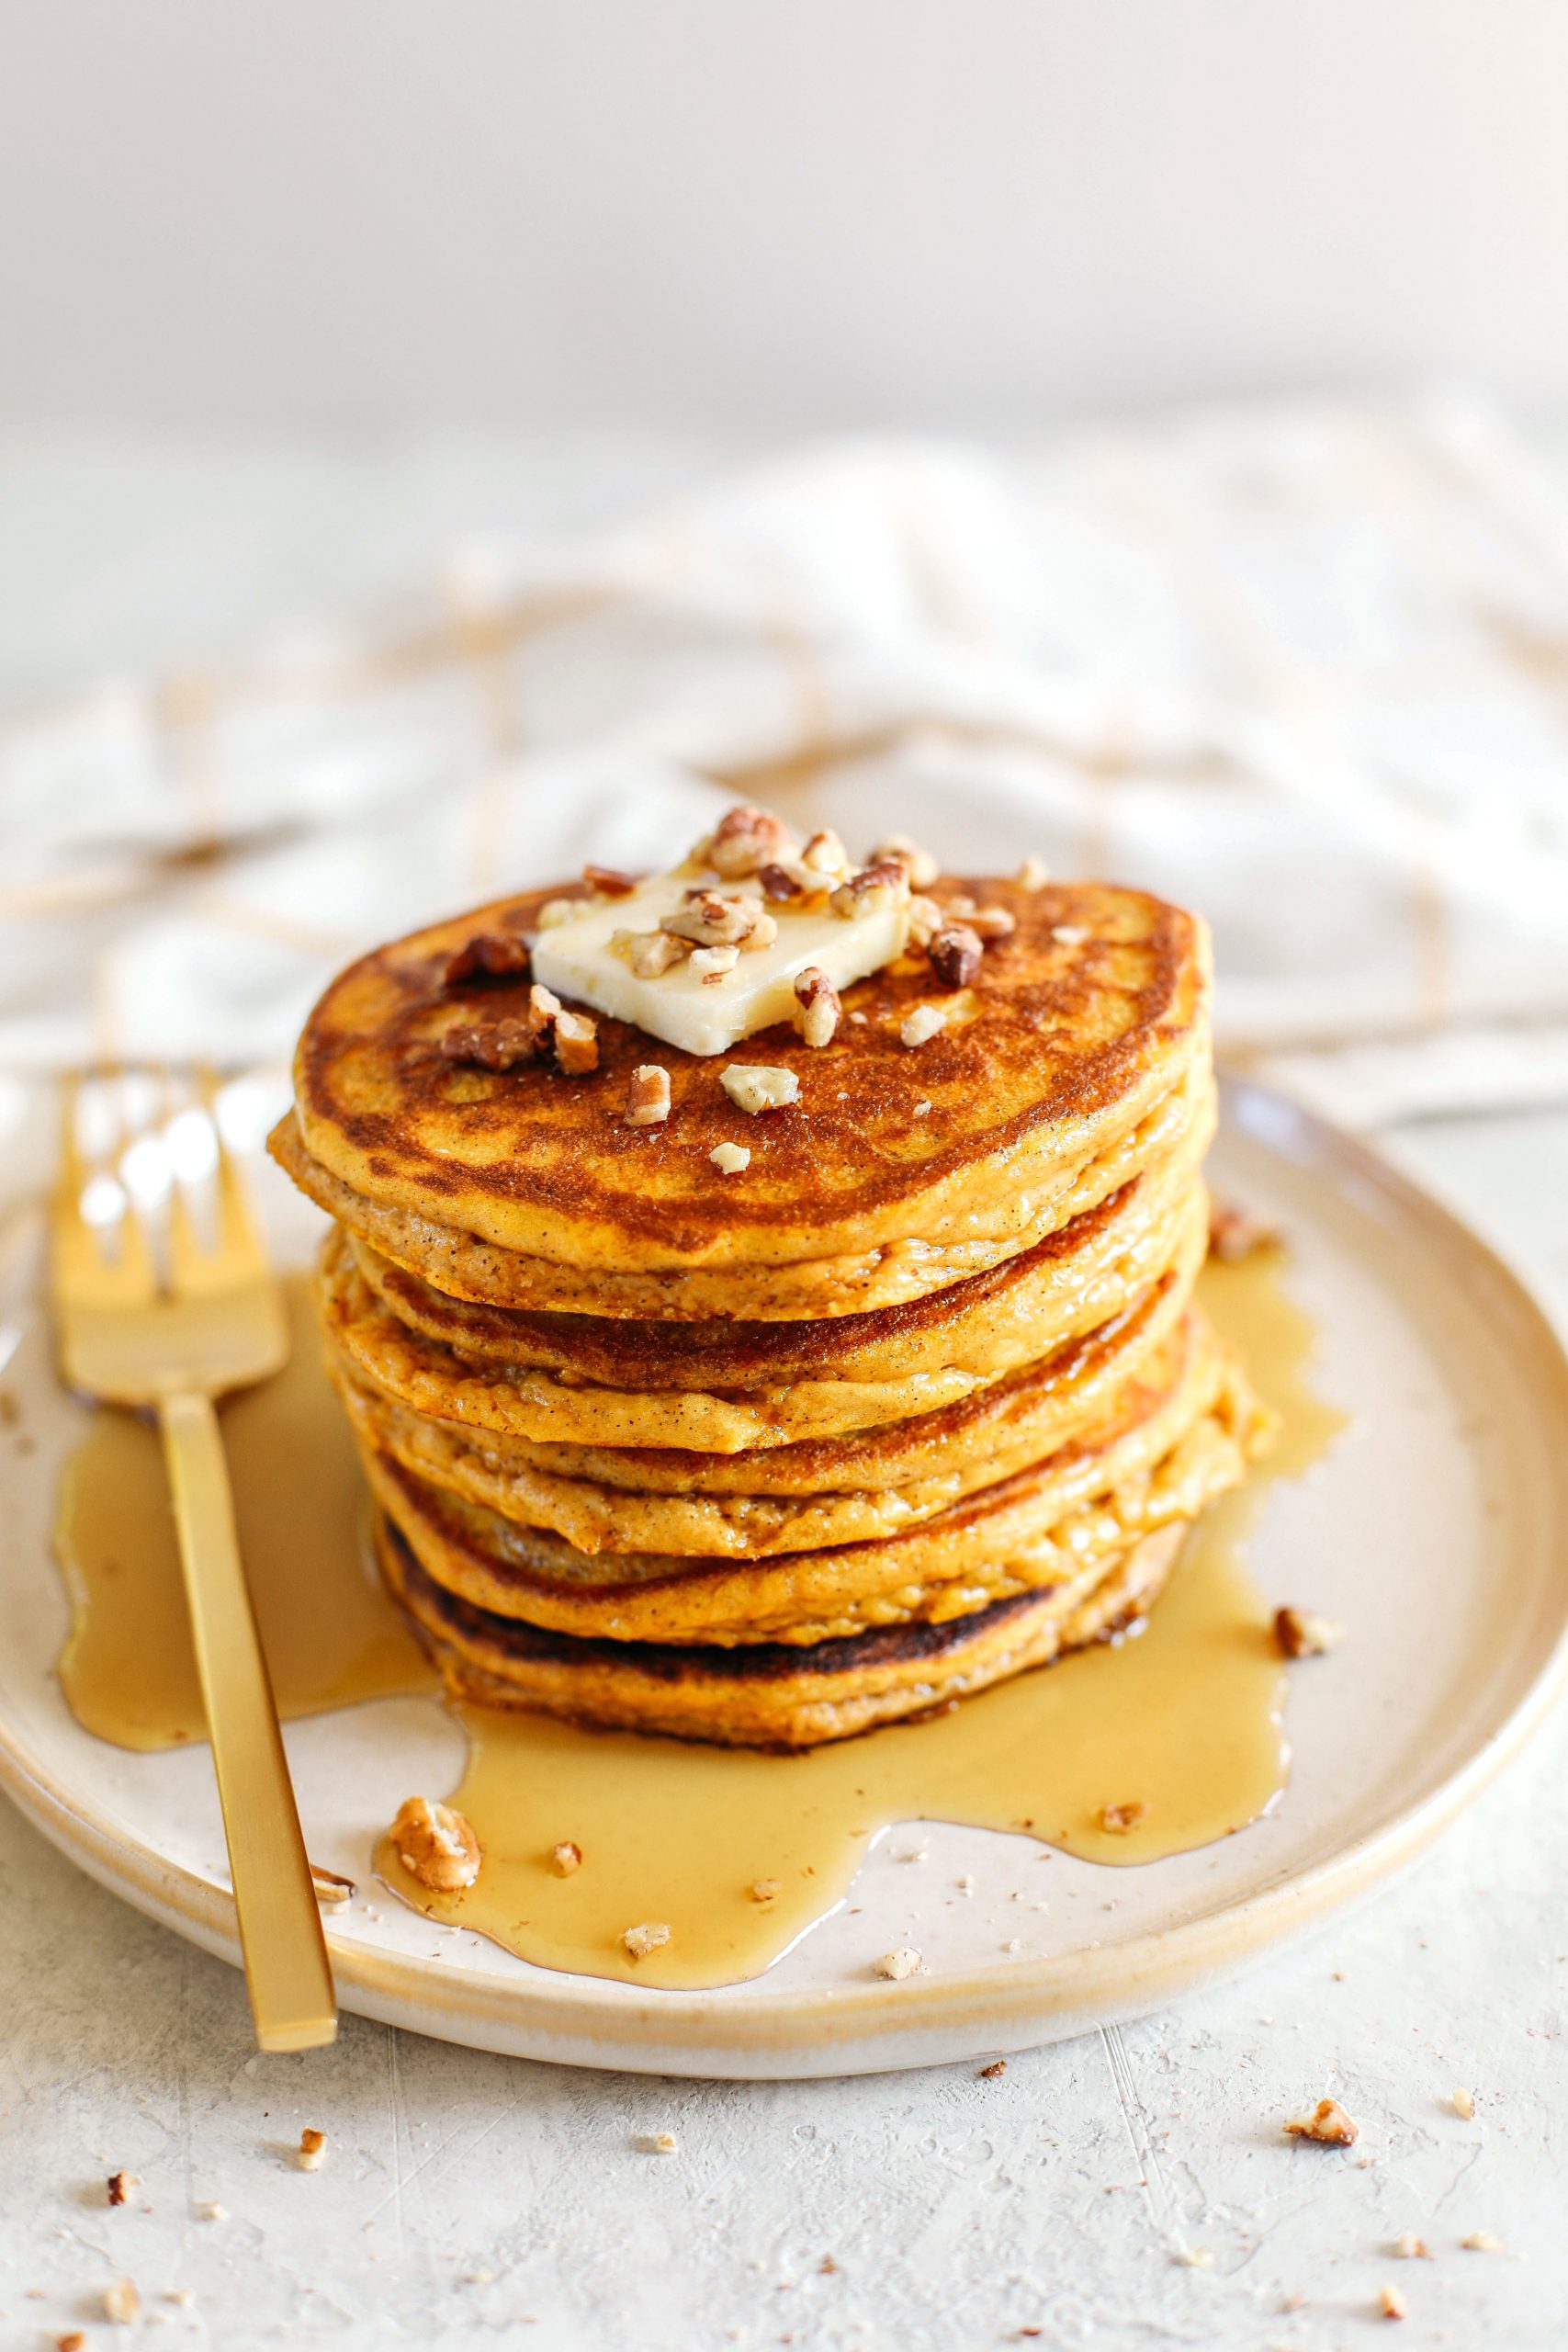 Start your morning with these fluffy pumpkin pancakes that are gluten-free, dairy-free and paleo with zero refined sugars made with almond flour for an easy delicious fall breakfast!